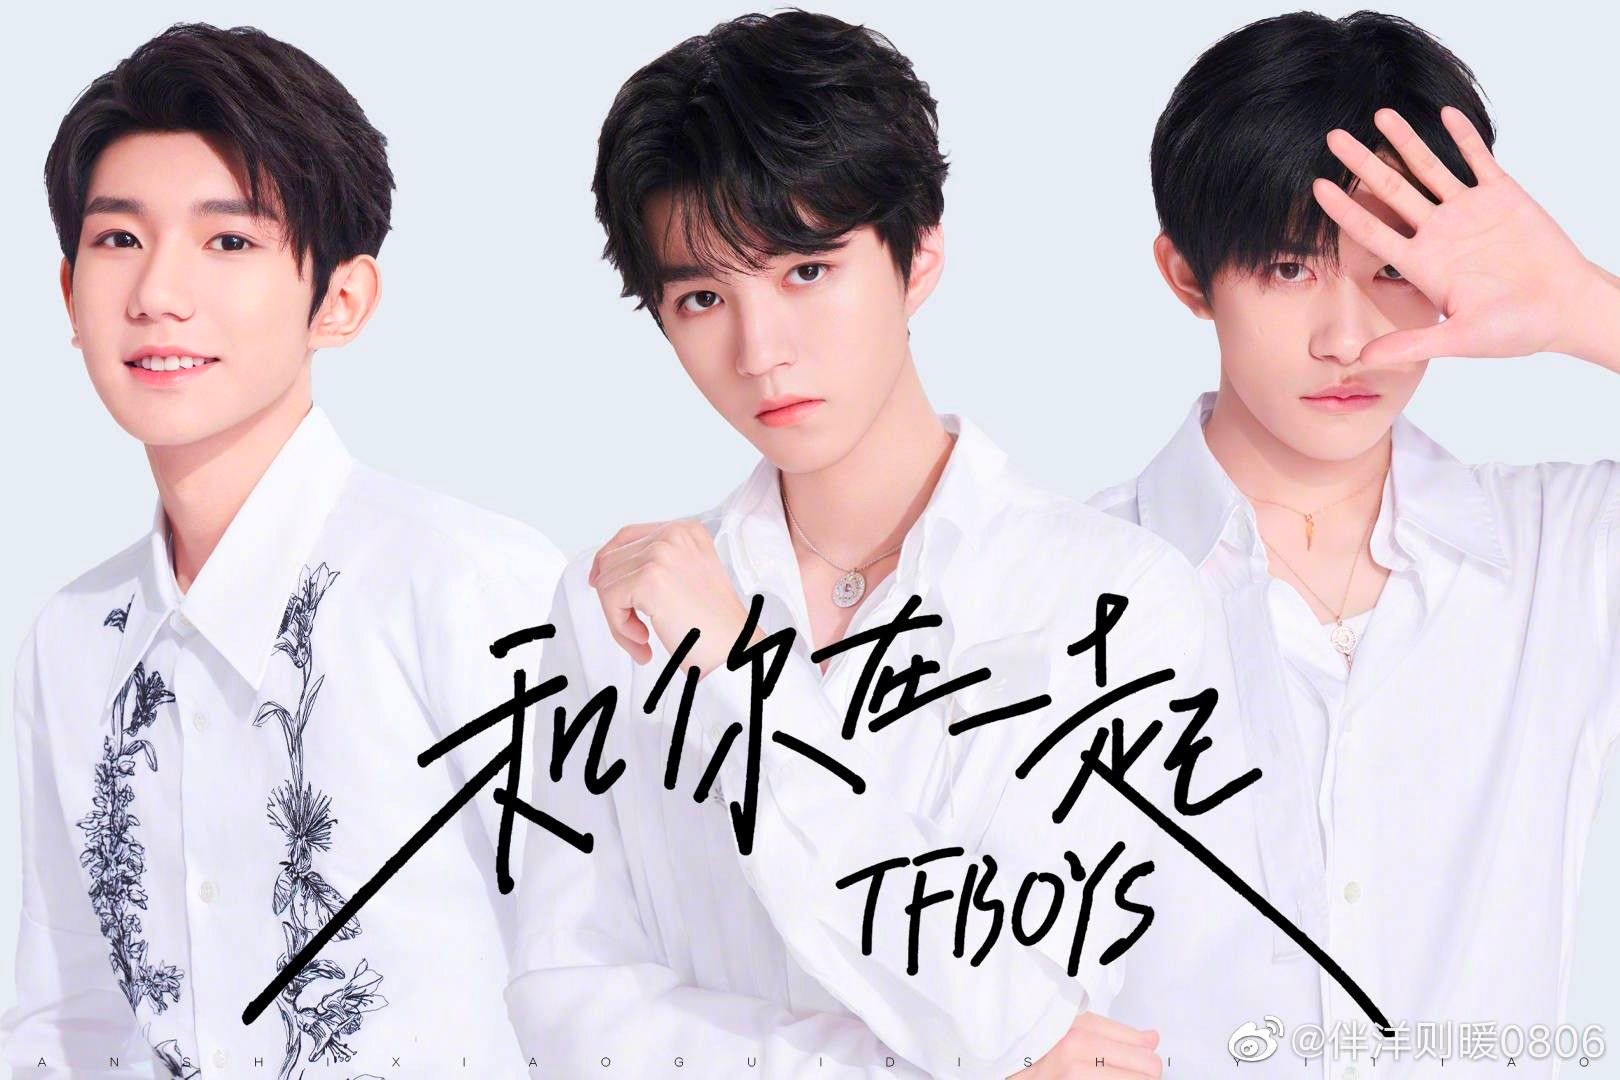 concert-tfboys-gia-ve-cham-nguong-2-trieu-te-66-ty-dong-ty-le-choi-hon-ca-ky-thi-cao-khao-269-6952090.png